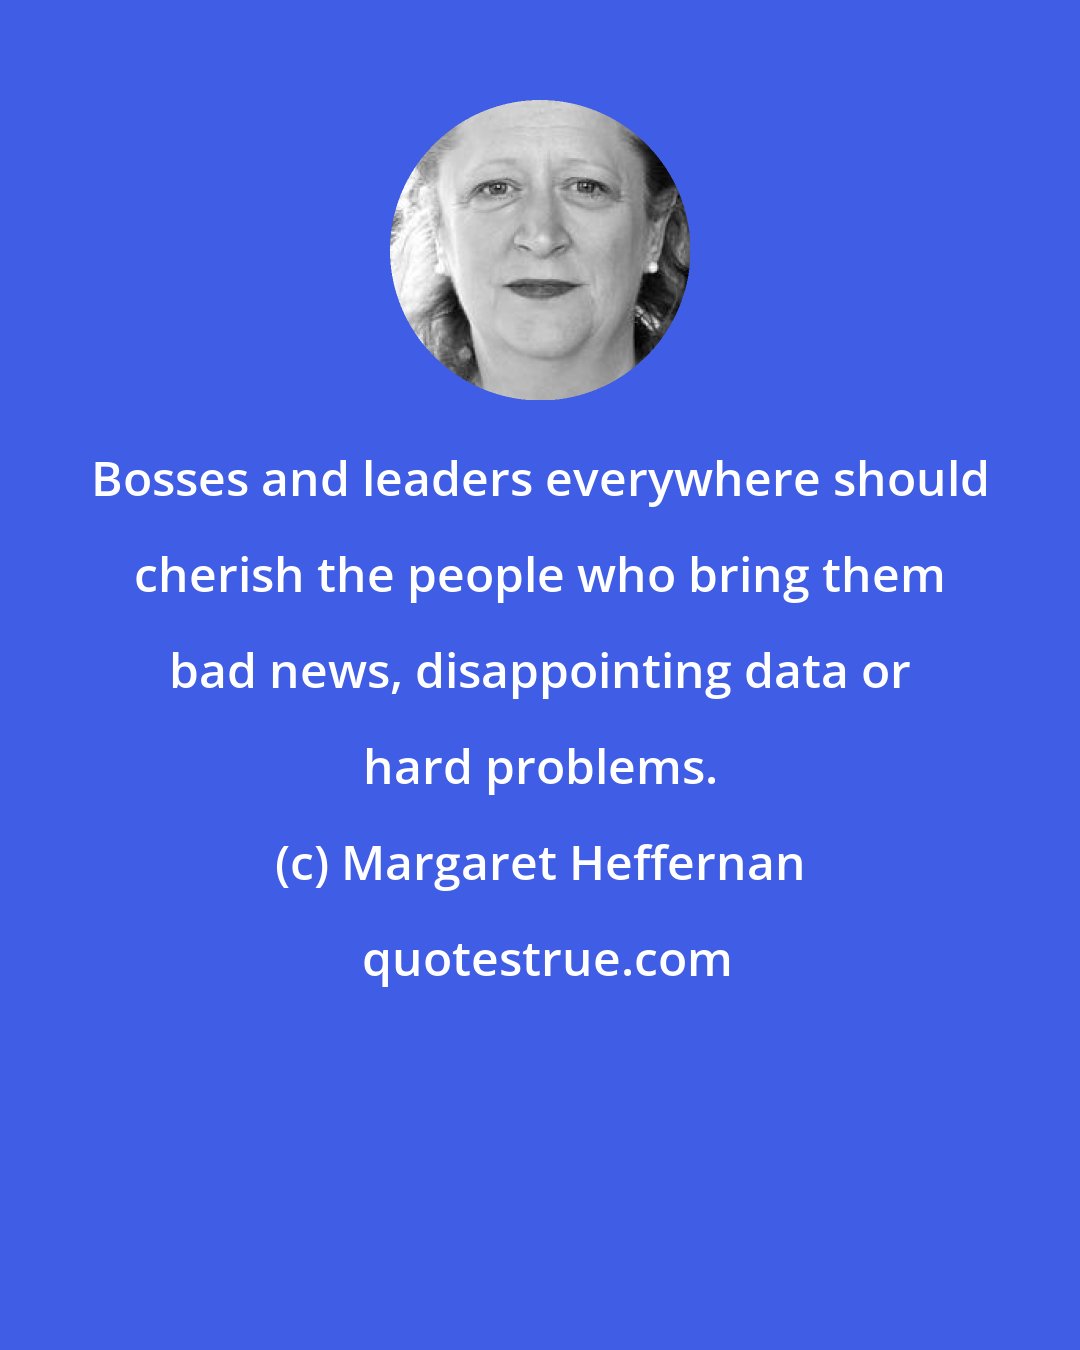 Margaret Heffernan: Bosses and leaders everywhere should cherish the people who bring them bad news, disappointing data or hard problems.